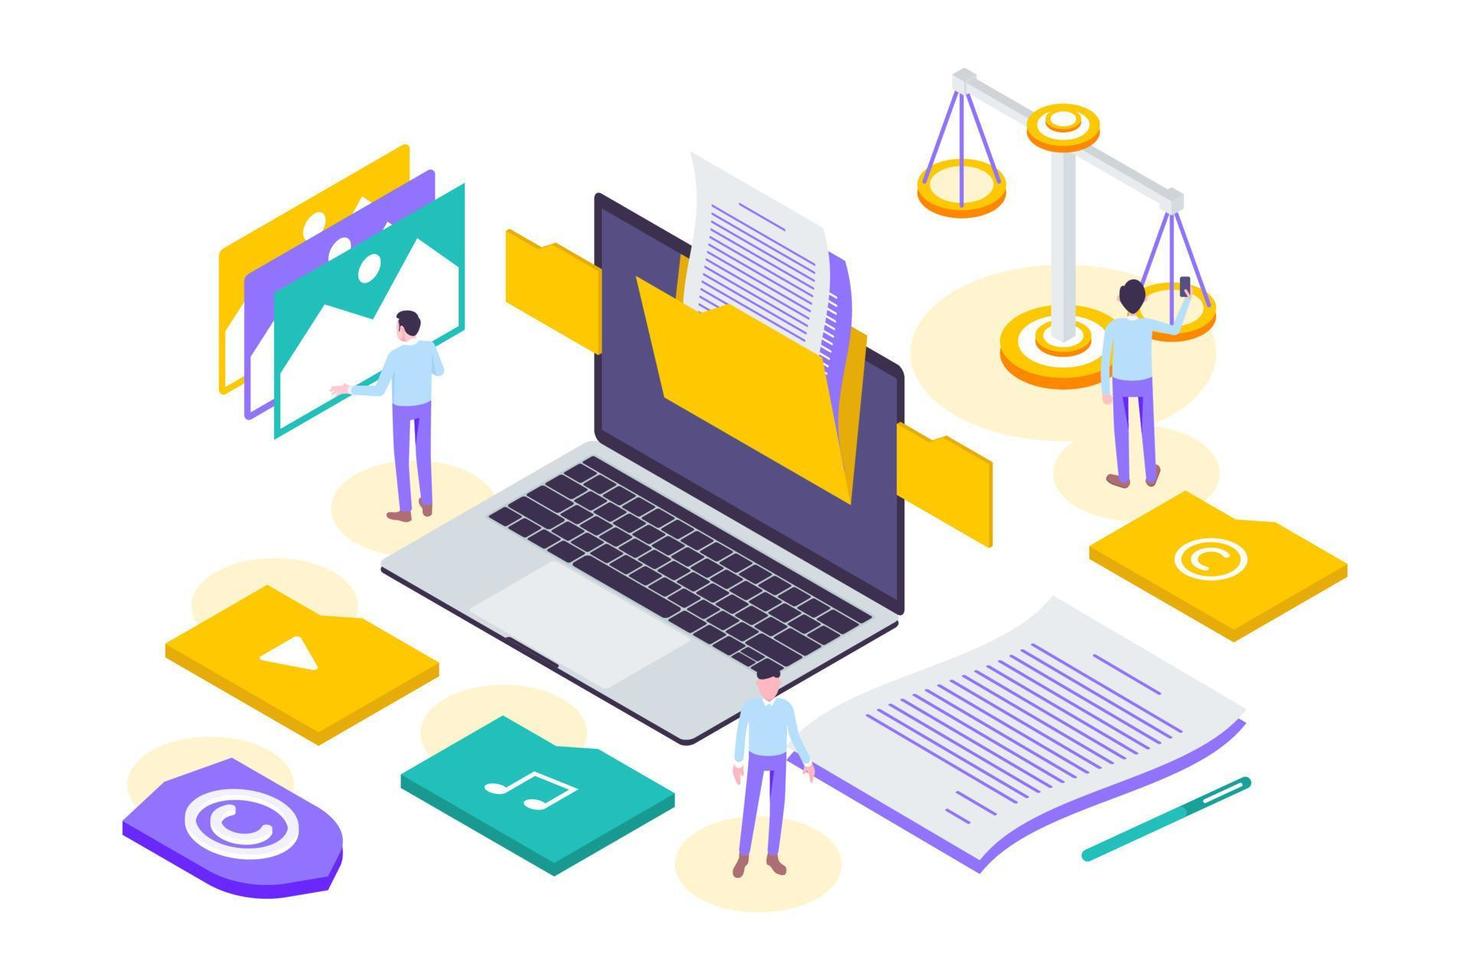 Modern Isometric Copyright and Internet Technology Law Illustration, Web Banners, Suitable for Diagrams, Infographics, Book Illustration, Game Asset, And Other Graphic Assets vector